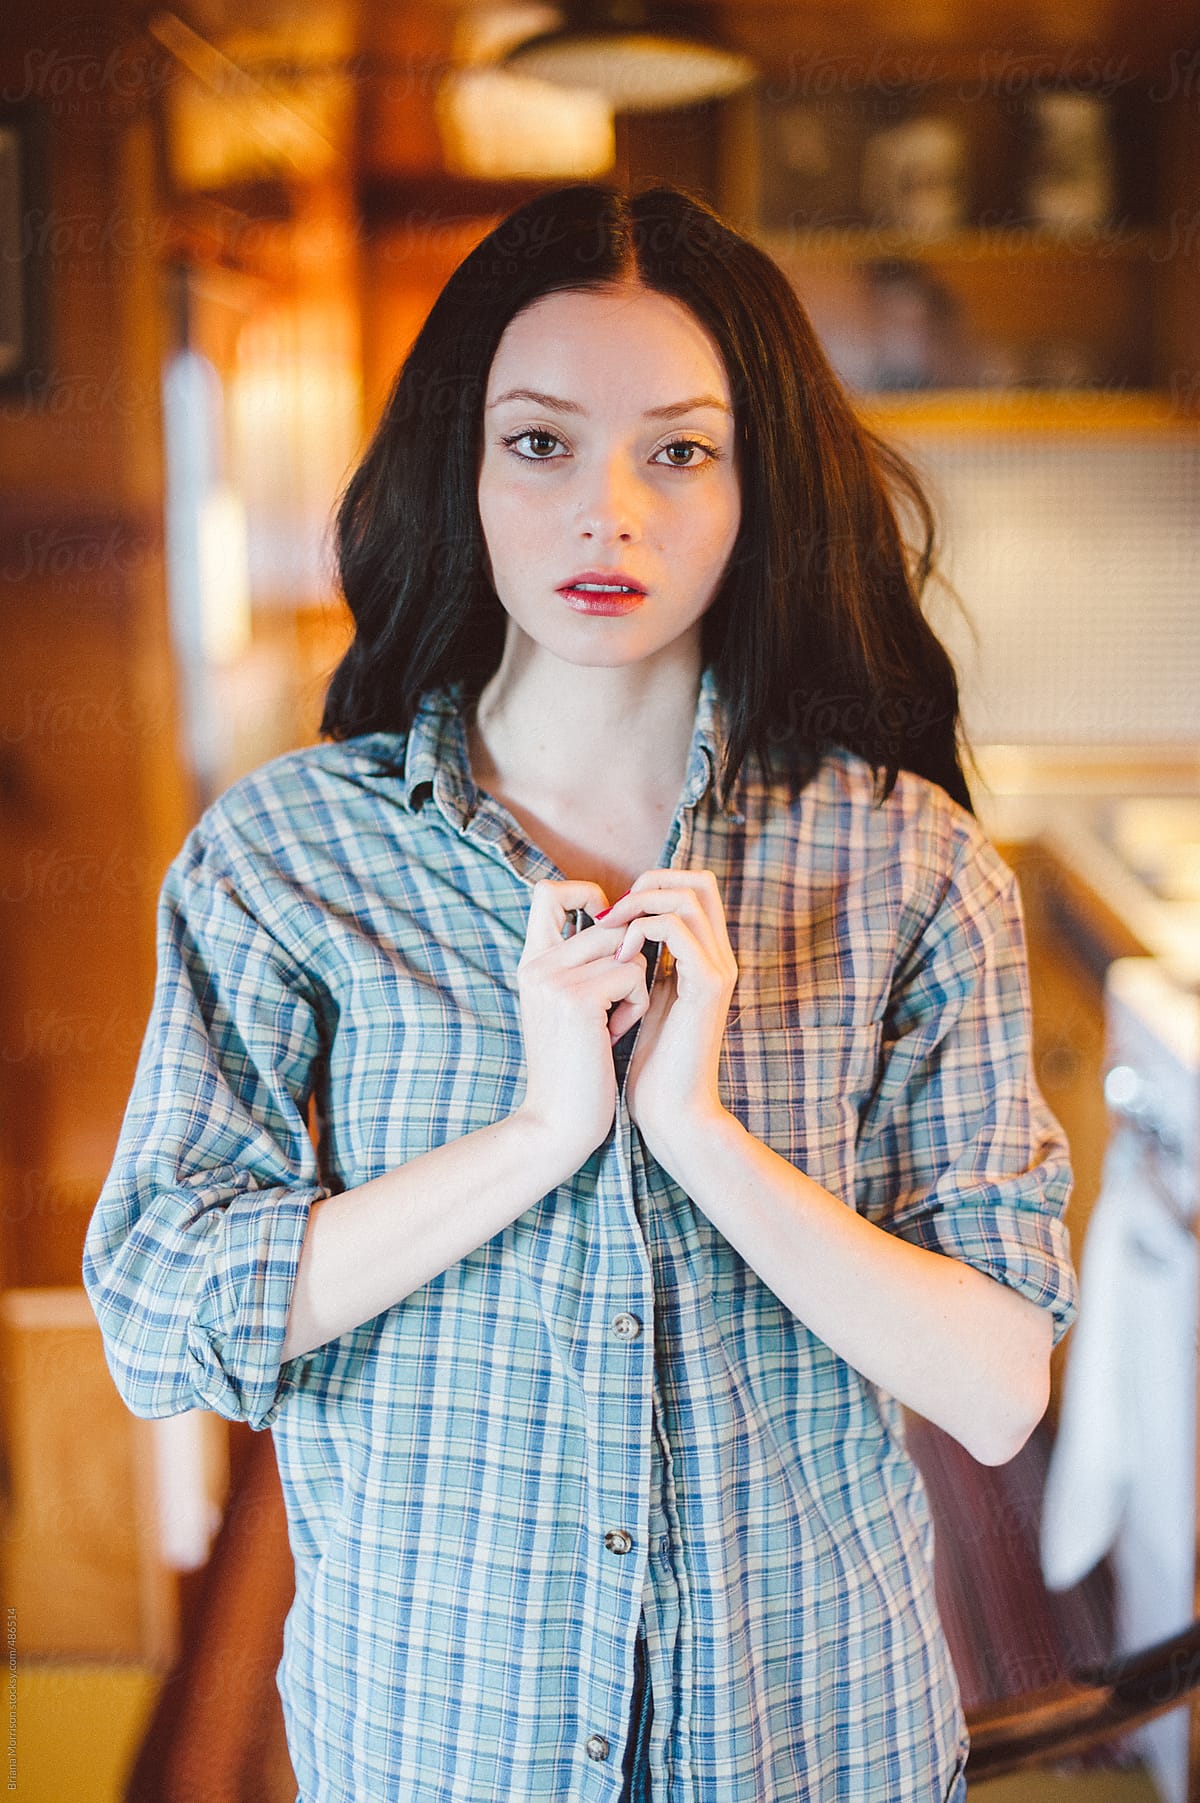 Young Woman Wearing a Plaid Shirt in a Kitchen